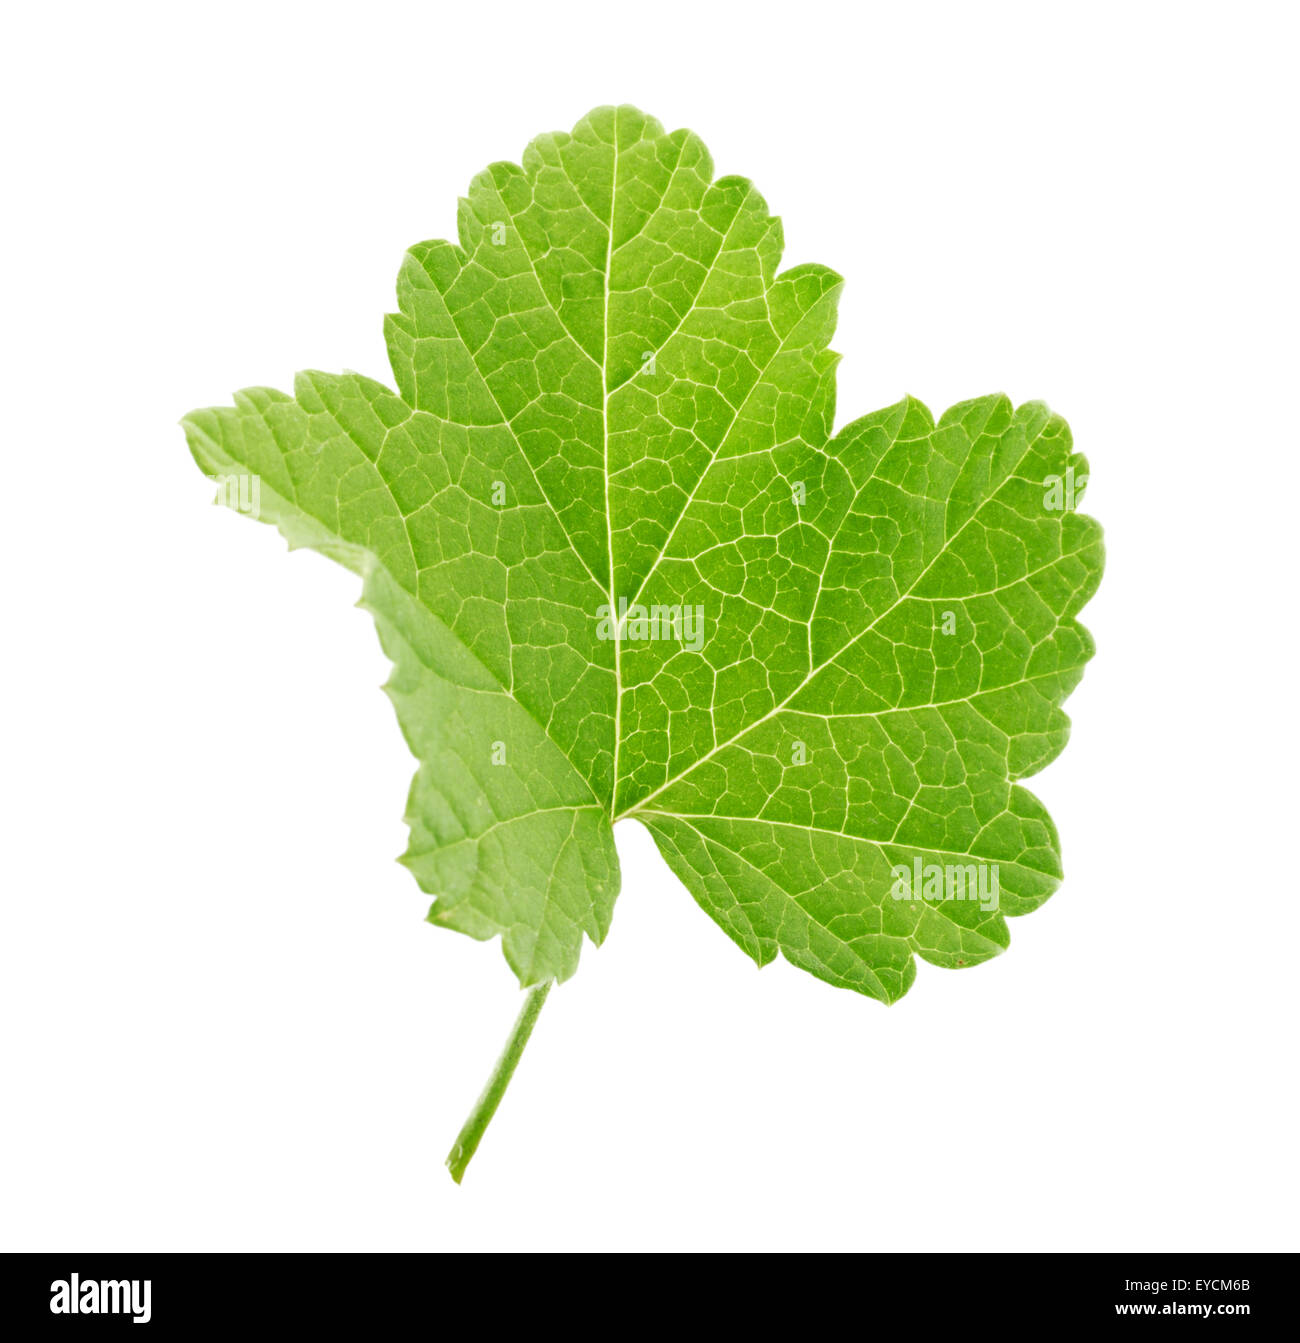 Currant leaf isolated on the white background. Stock Photo